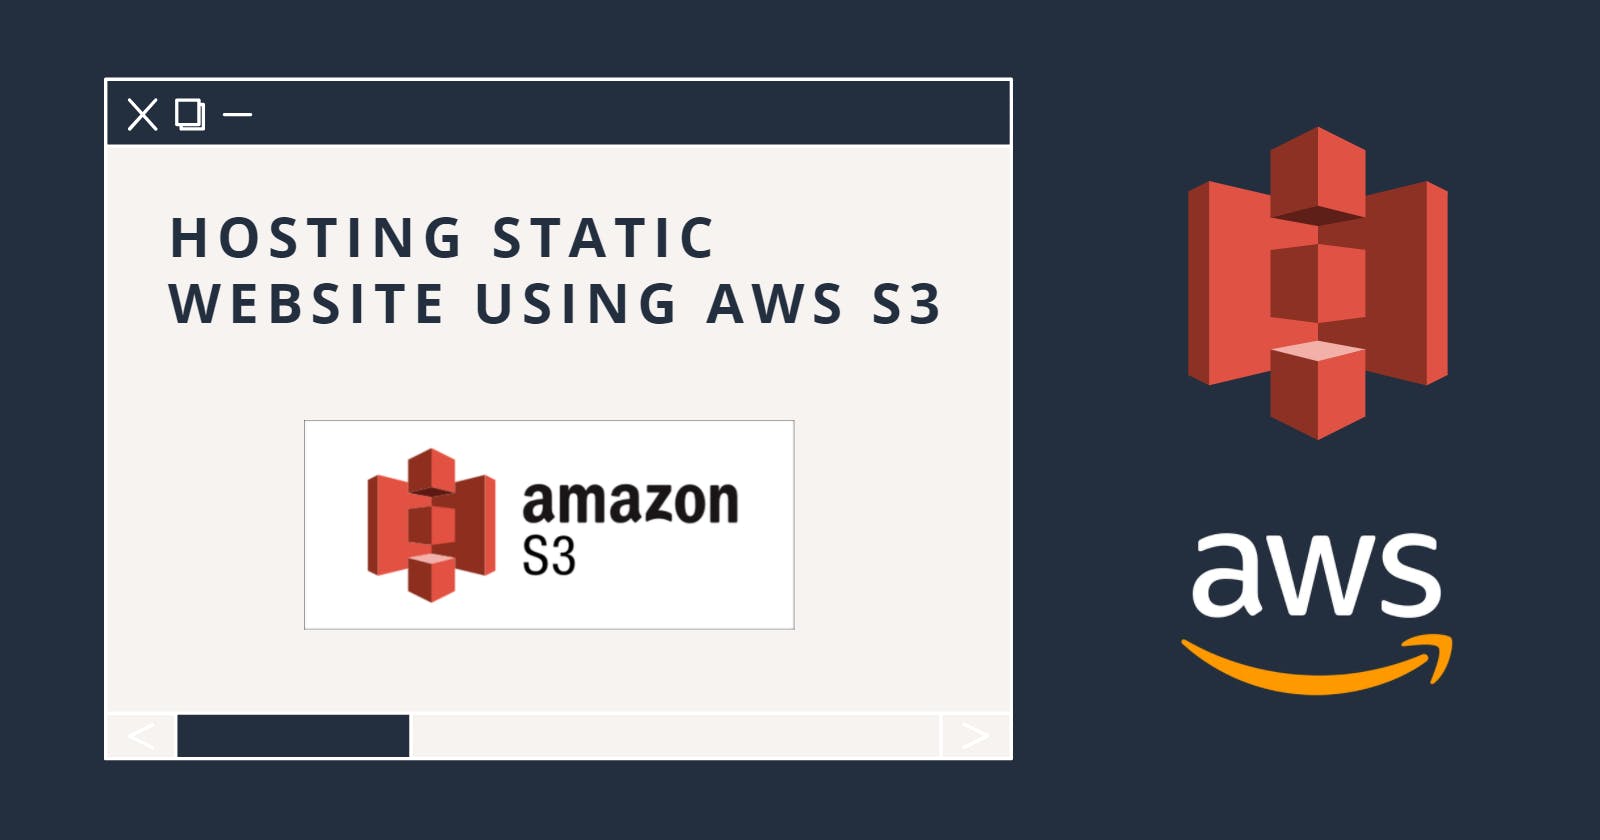 How to launch a static website on AWS S3 for free in 15 minutes